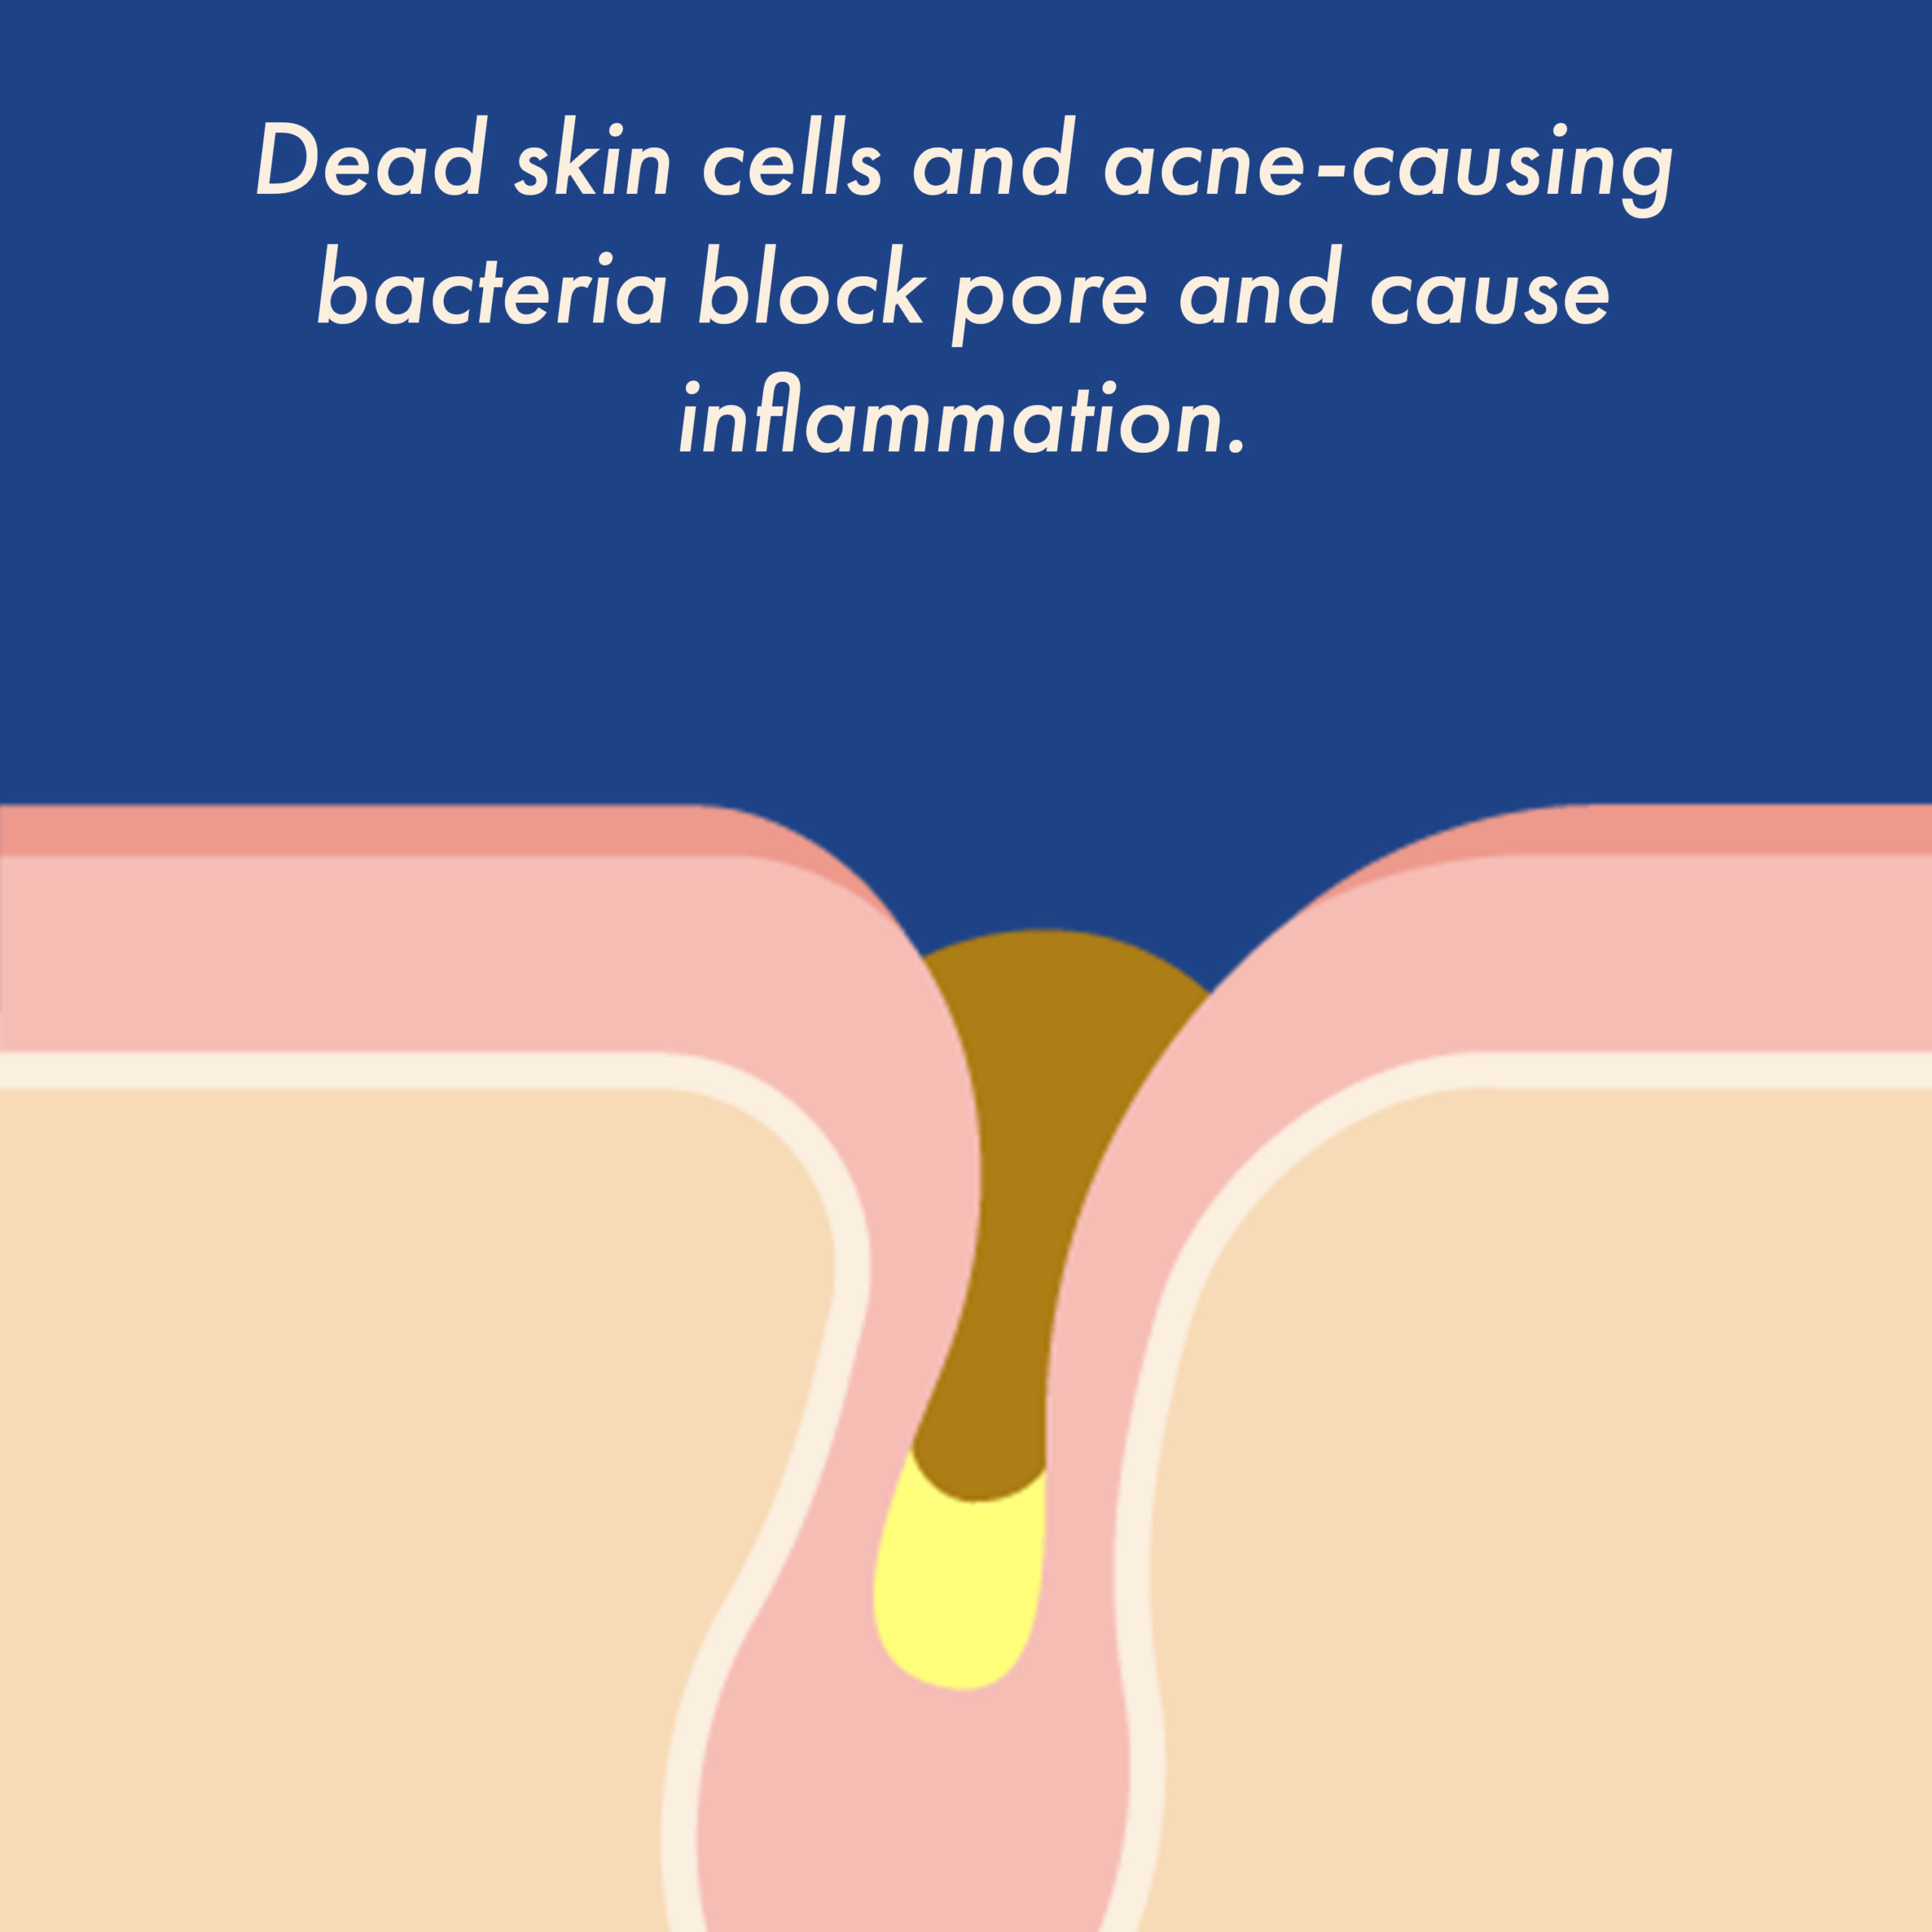 Dead skin cells and acne-causing bacteria block pores and cause inflammation.